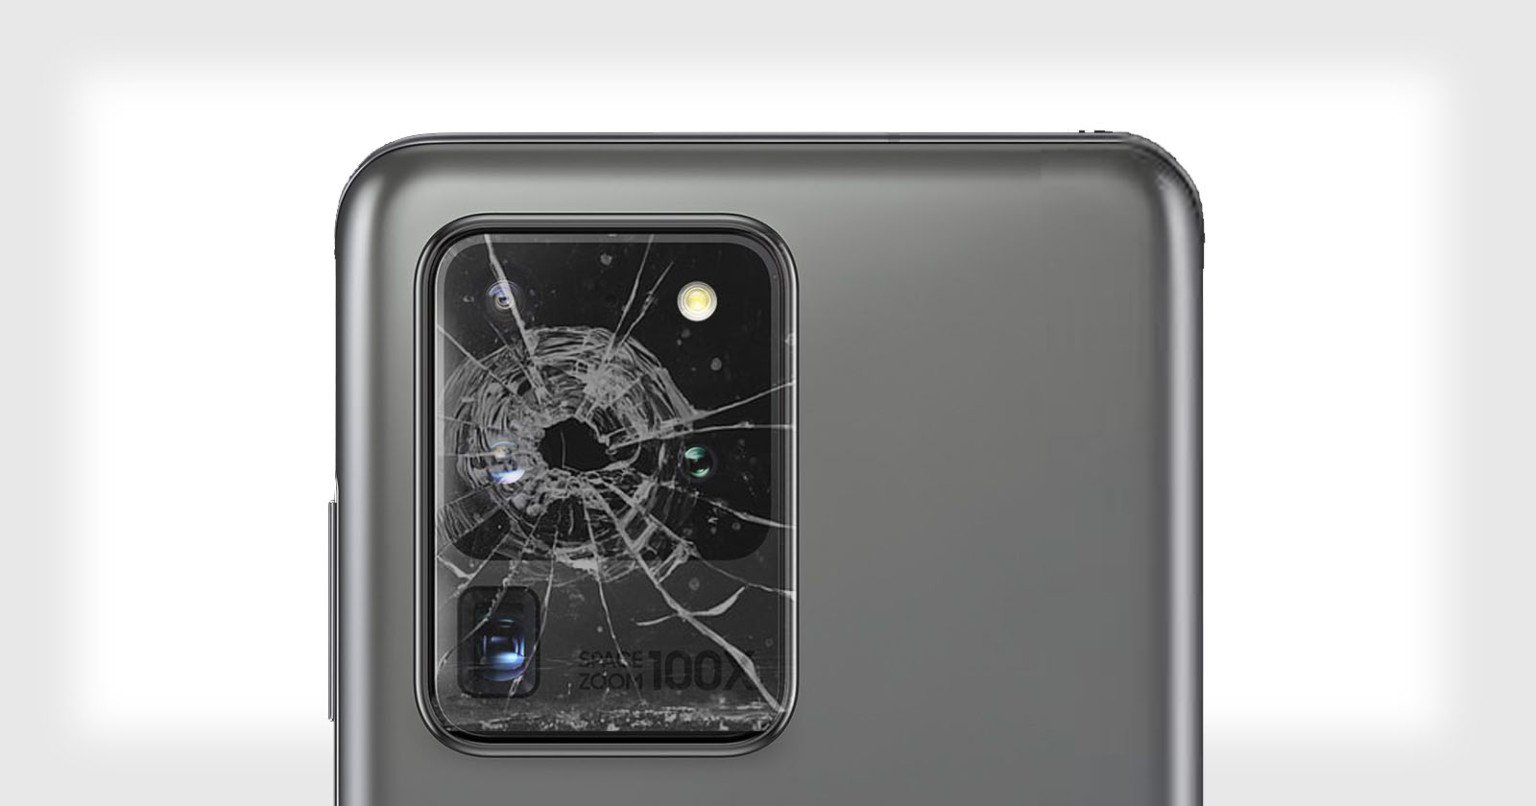 Samsung Galaxy S20 Ultra's Camera Glass is Shattering for Some Users